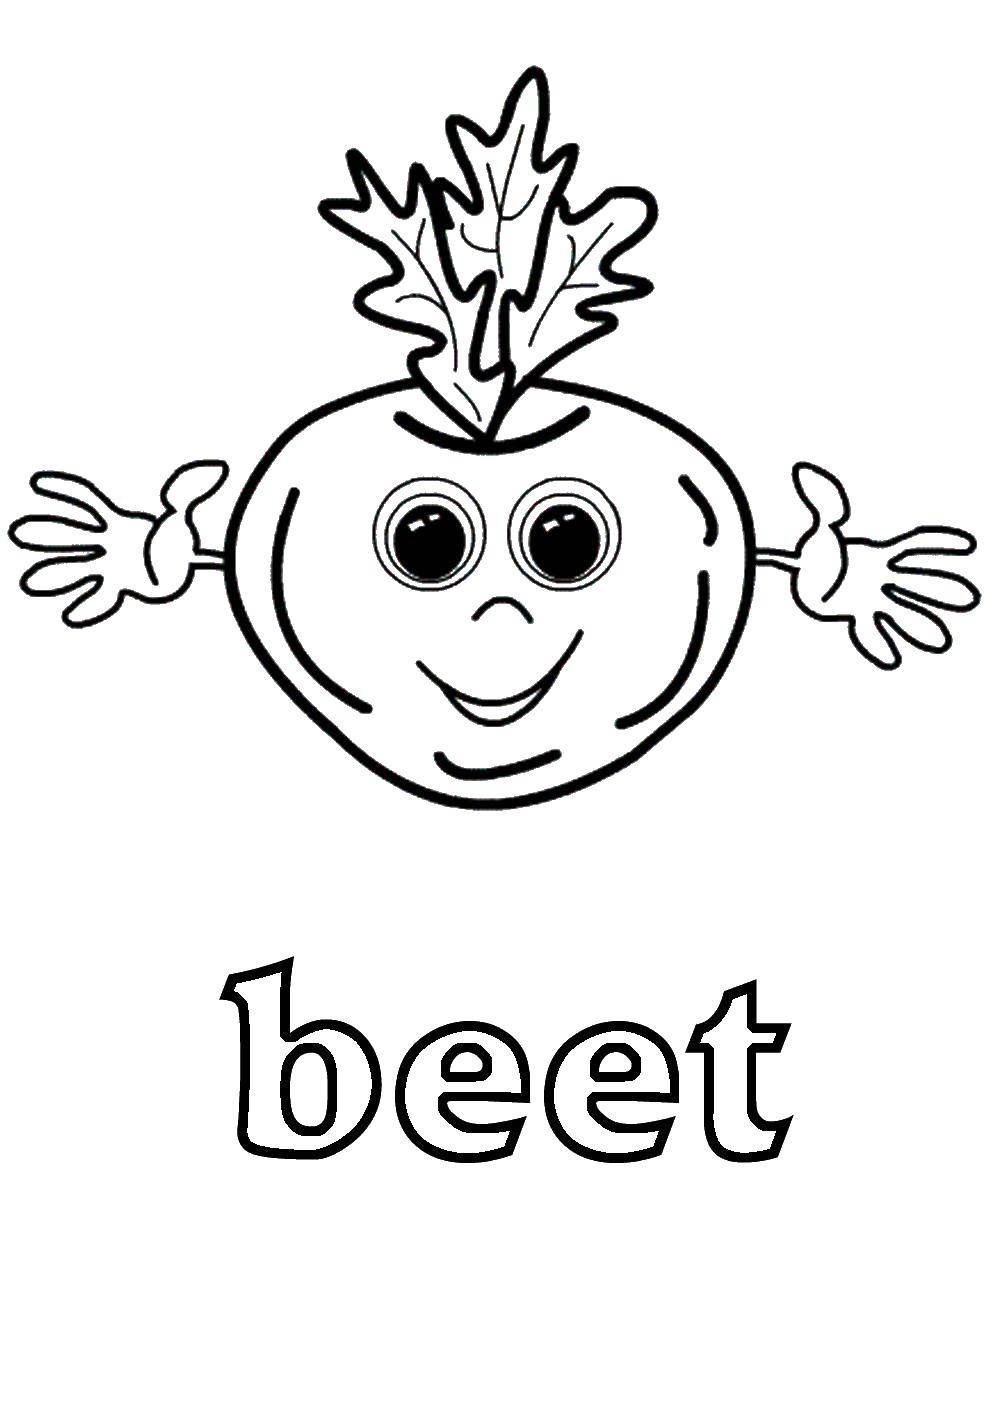 Coloring Beets. Category English words. Tags:  beets, English words.